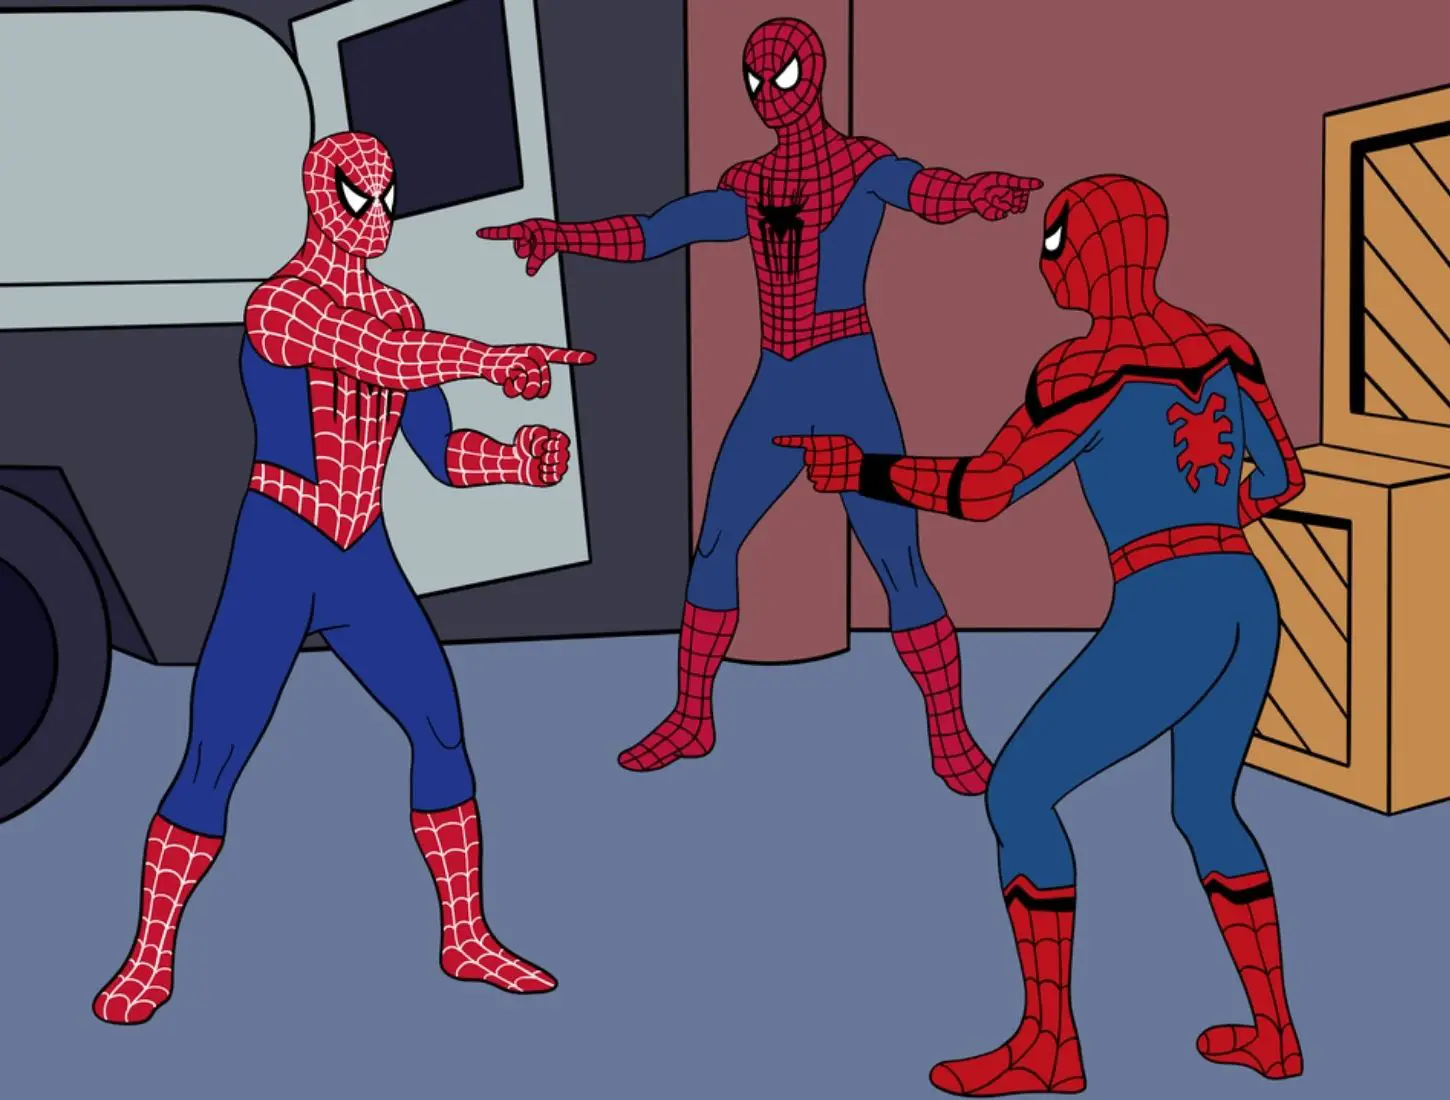 Spiderman-Pointing-Meme-Template-on-Pointing-at-Each-Other.jpg